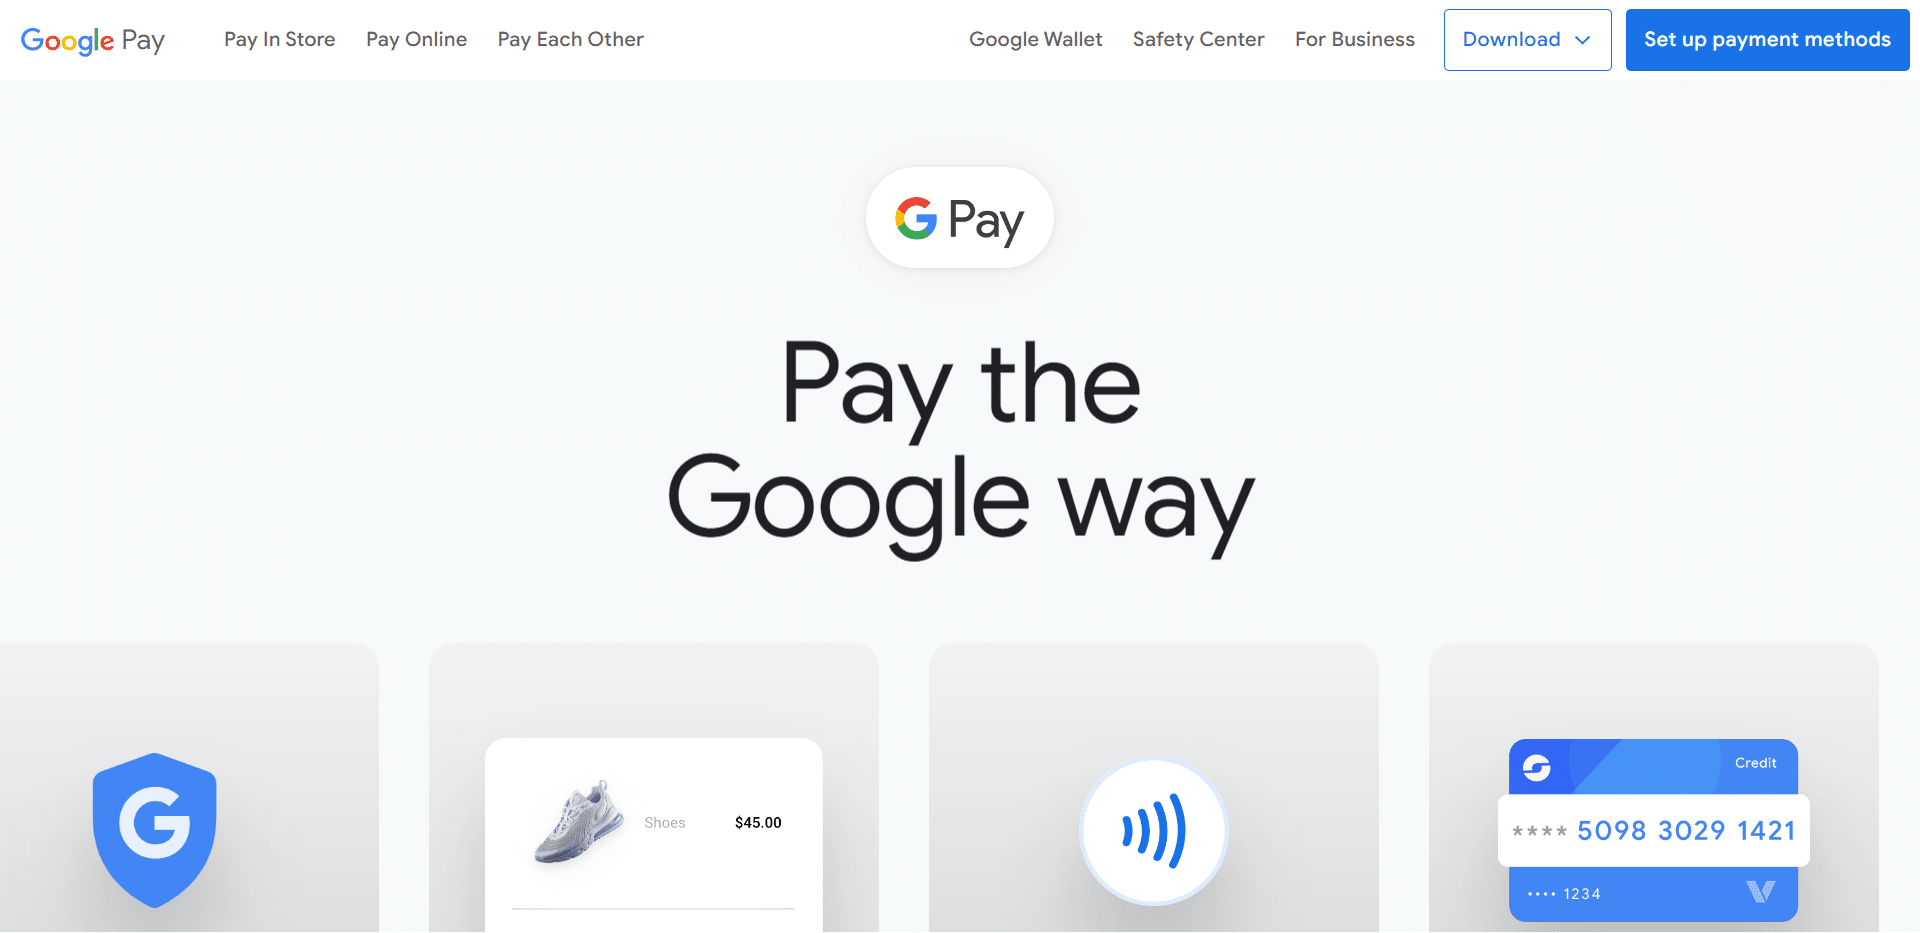 Landing page for Google Pay